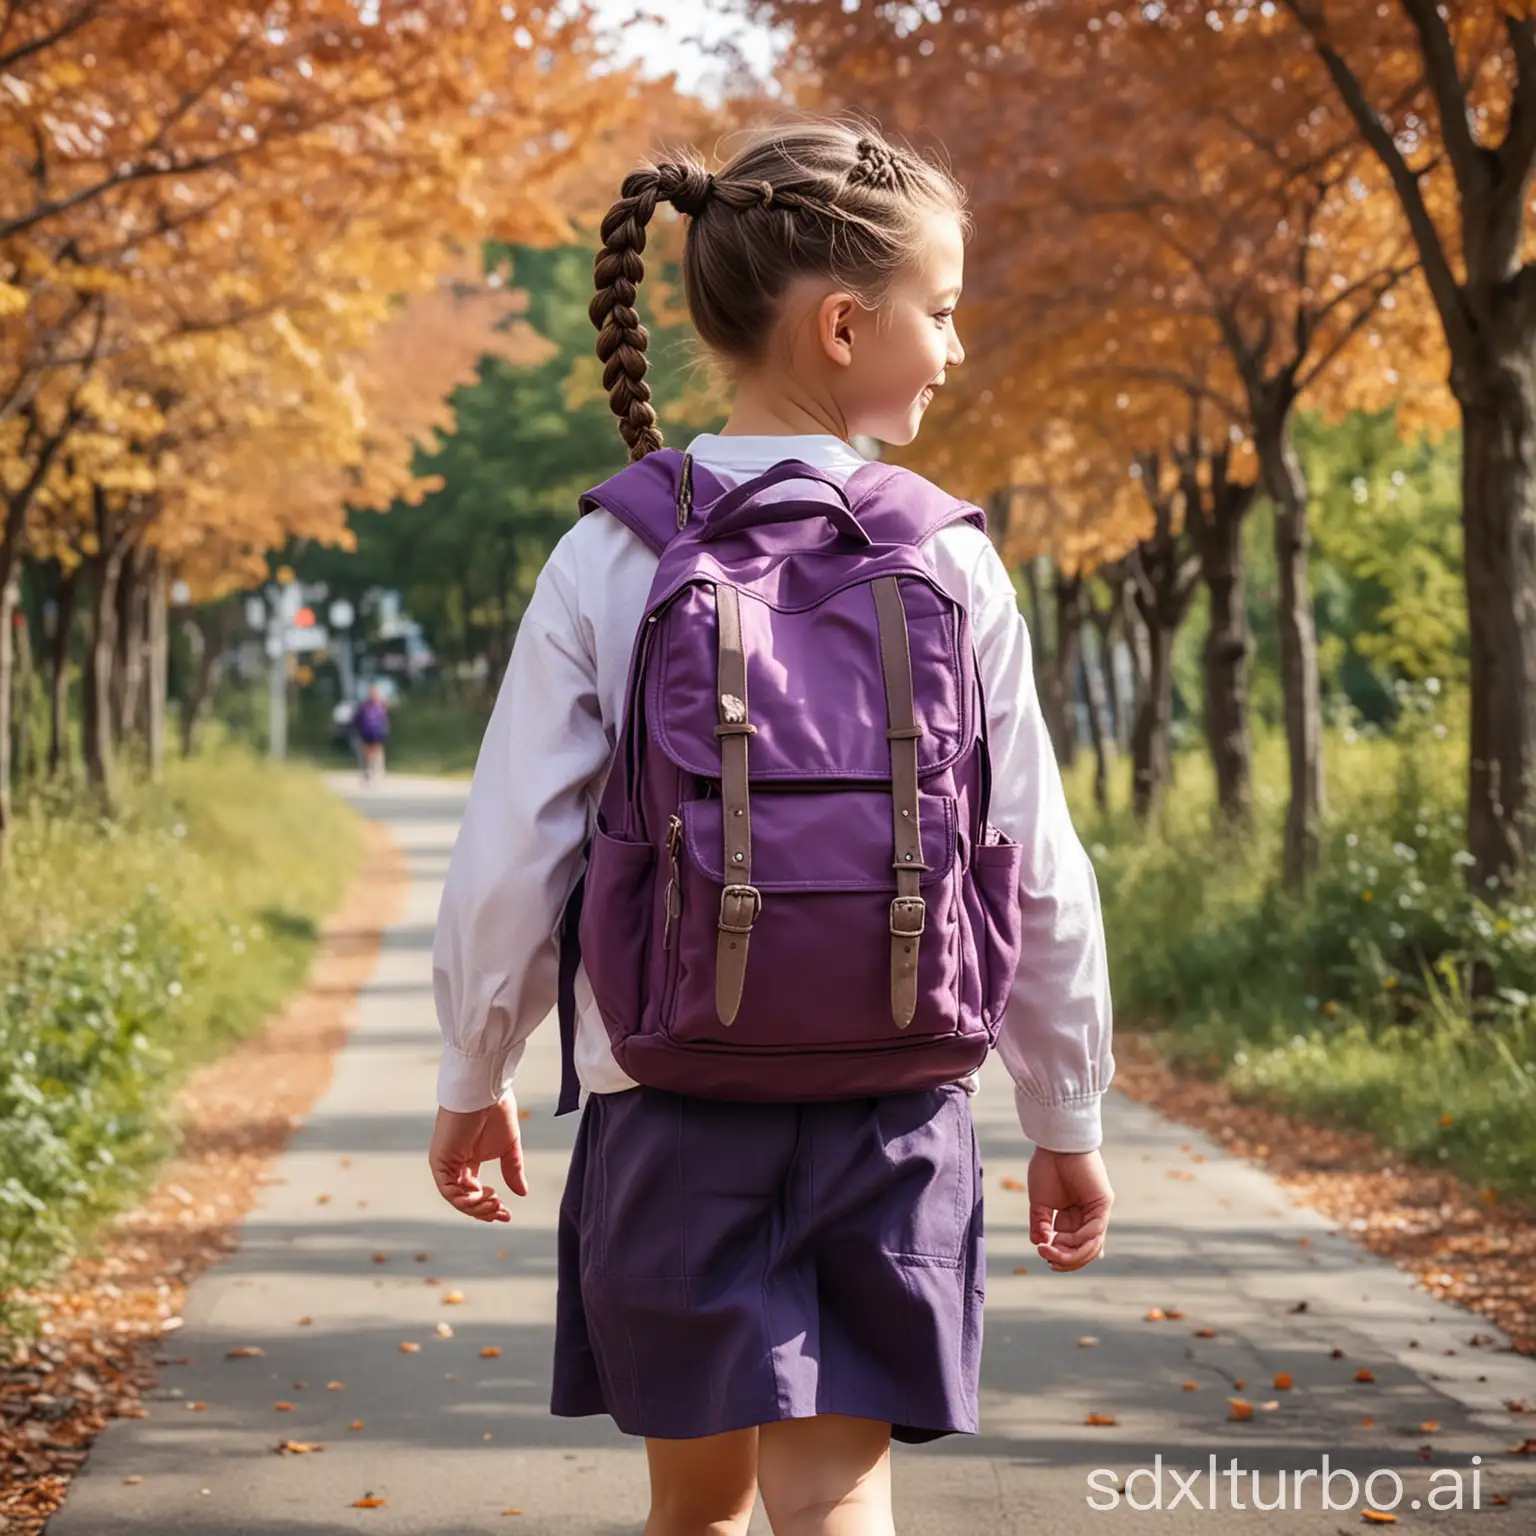 Happy-Little-Girl-with-Braided-Pigtails-Walking-Under-Maple-Trees